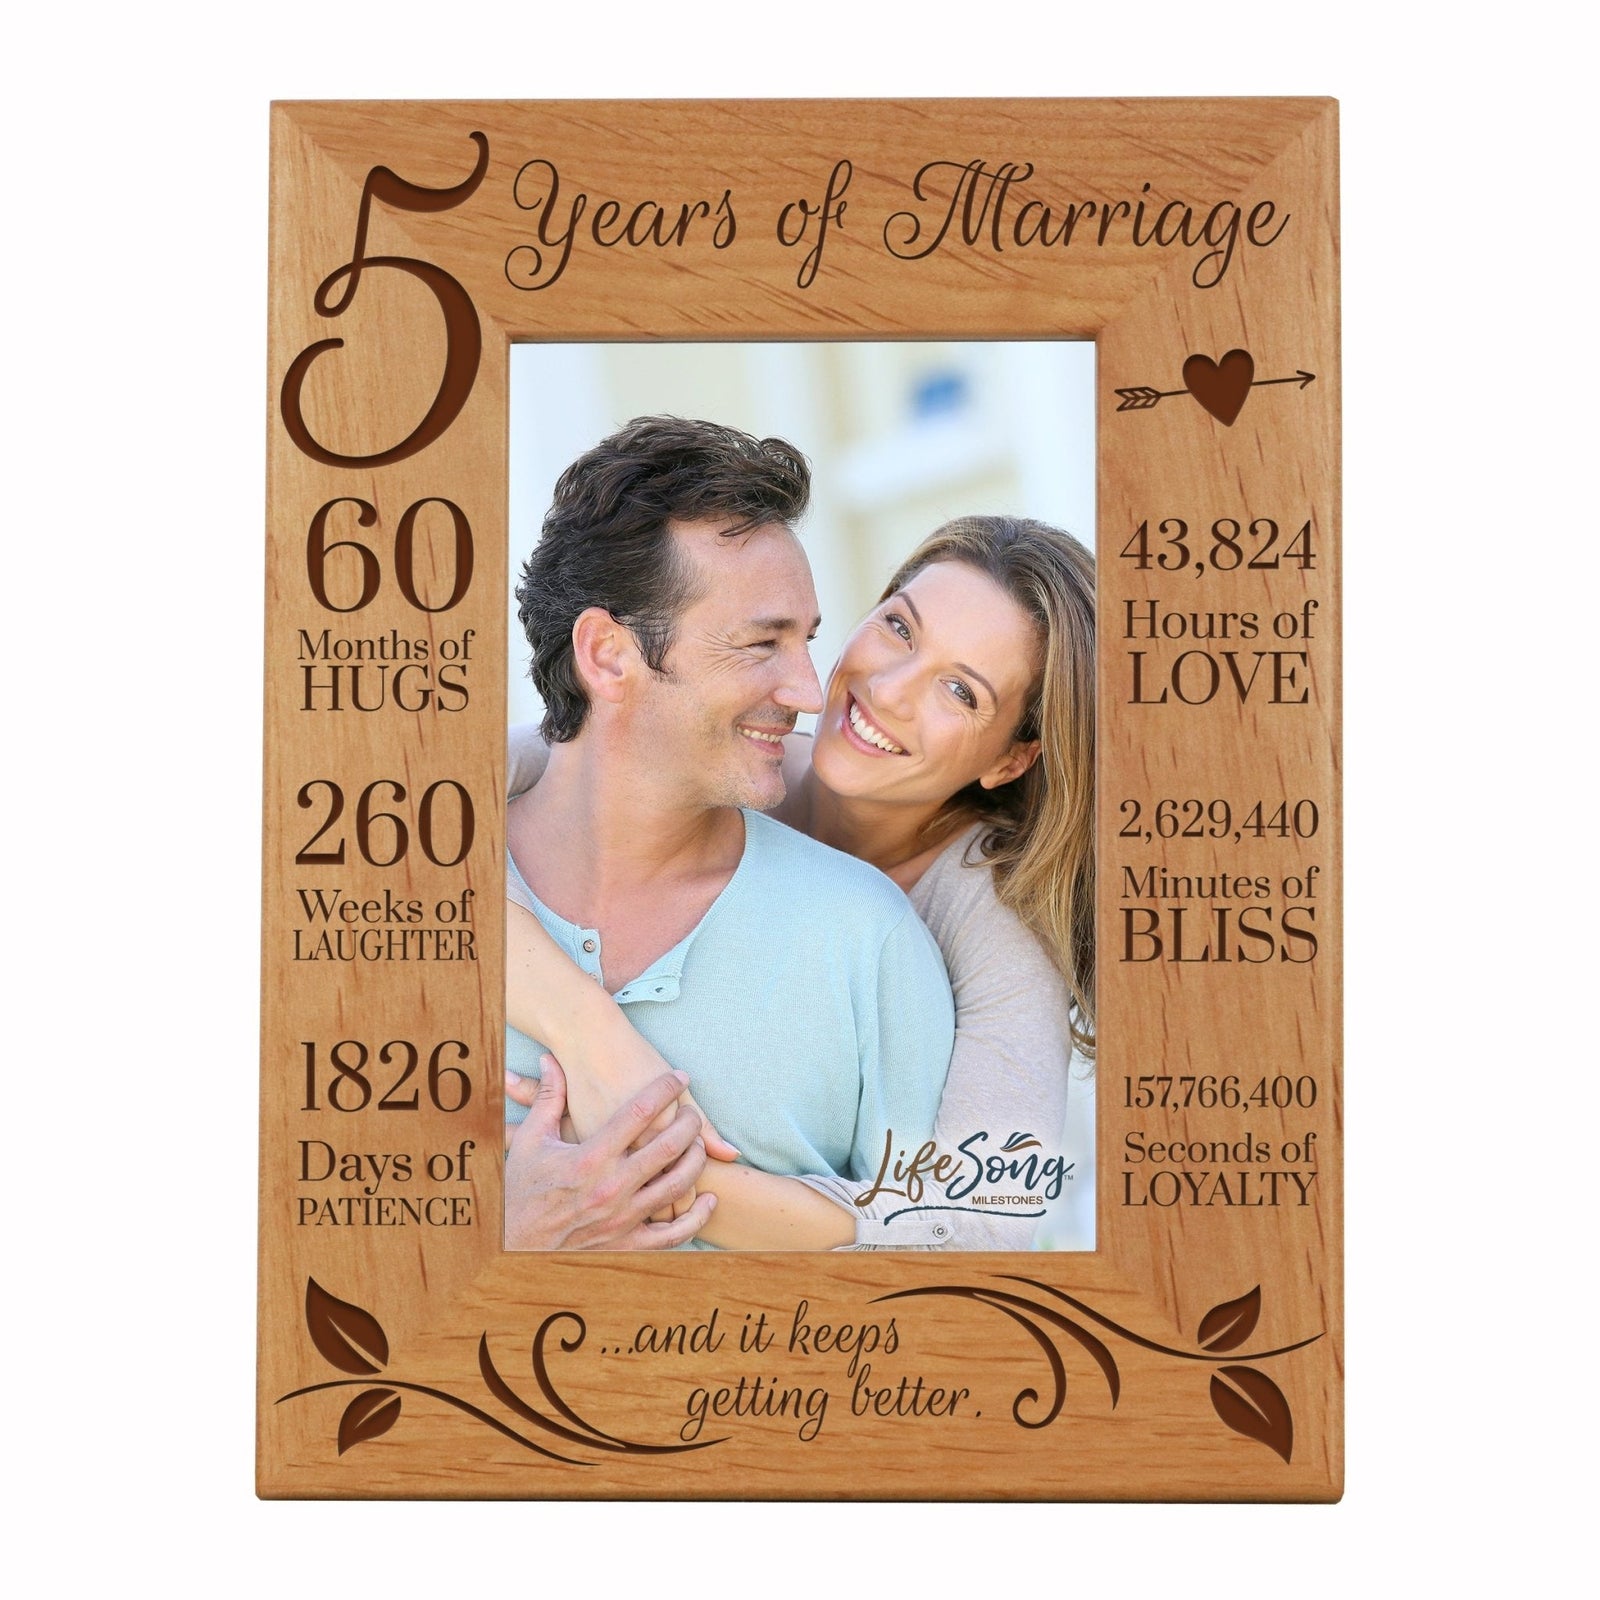 Engraved 5th Anniversary Picture Frame Gift for Couples - Keeps Getting Better - LifeSong Milestones